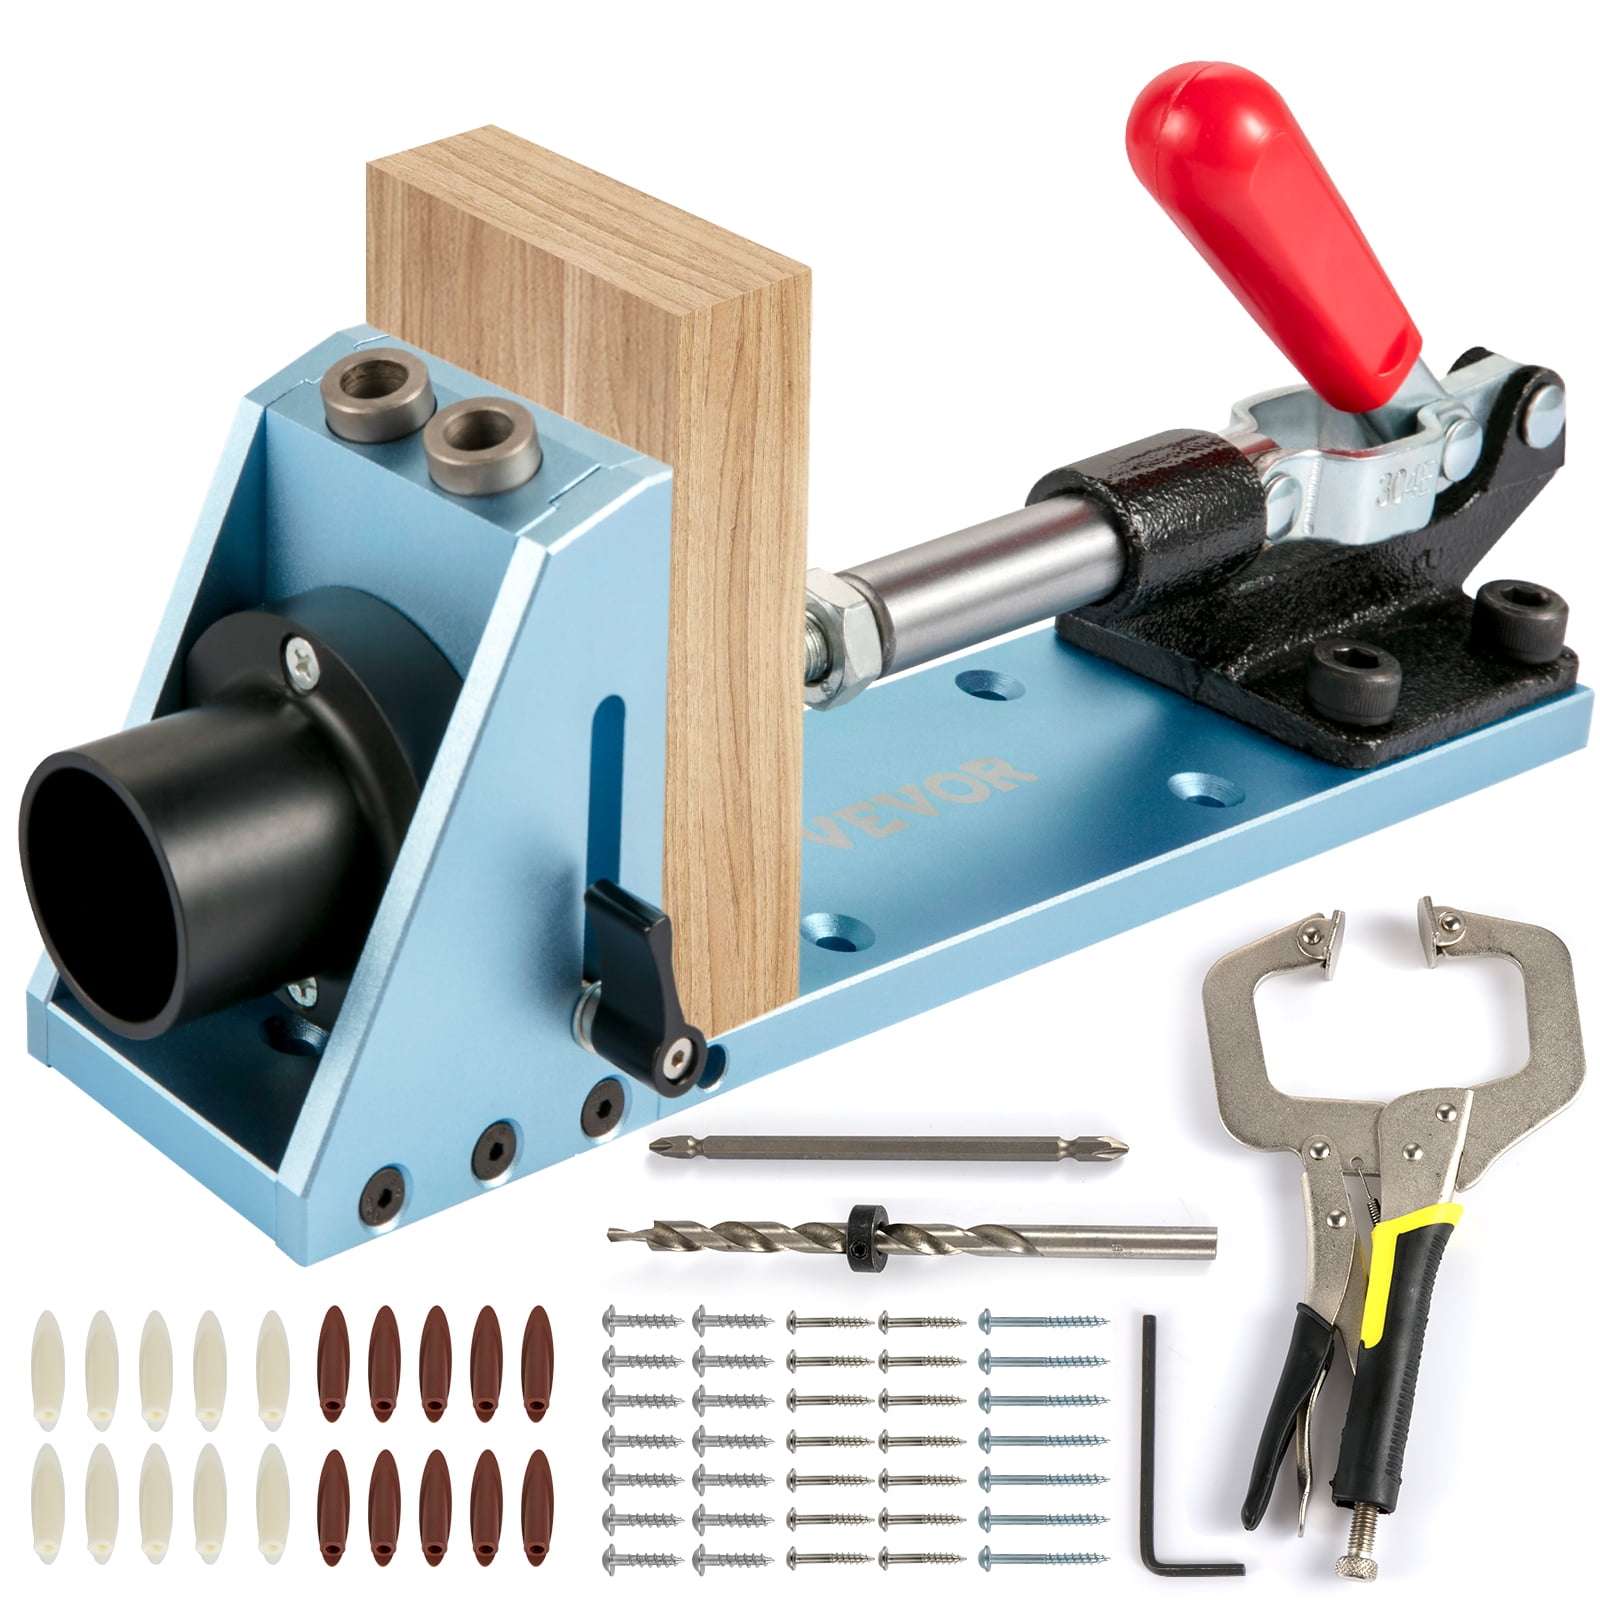 2in1 Woodworking Locator Carpentry Wood Doweling Drill Handheld Pocket Hole Jig 